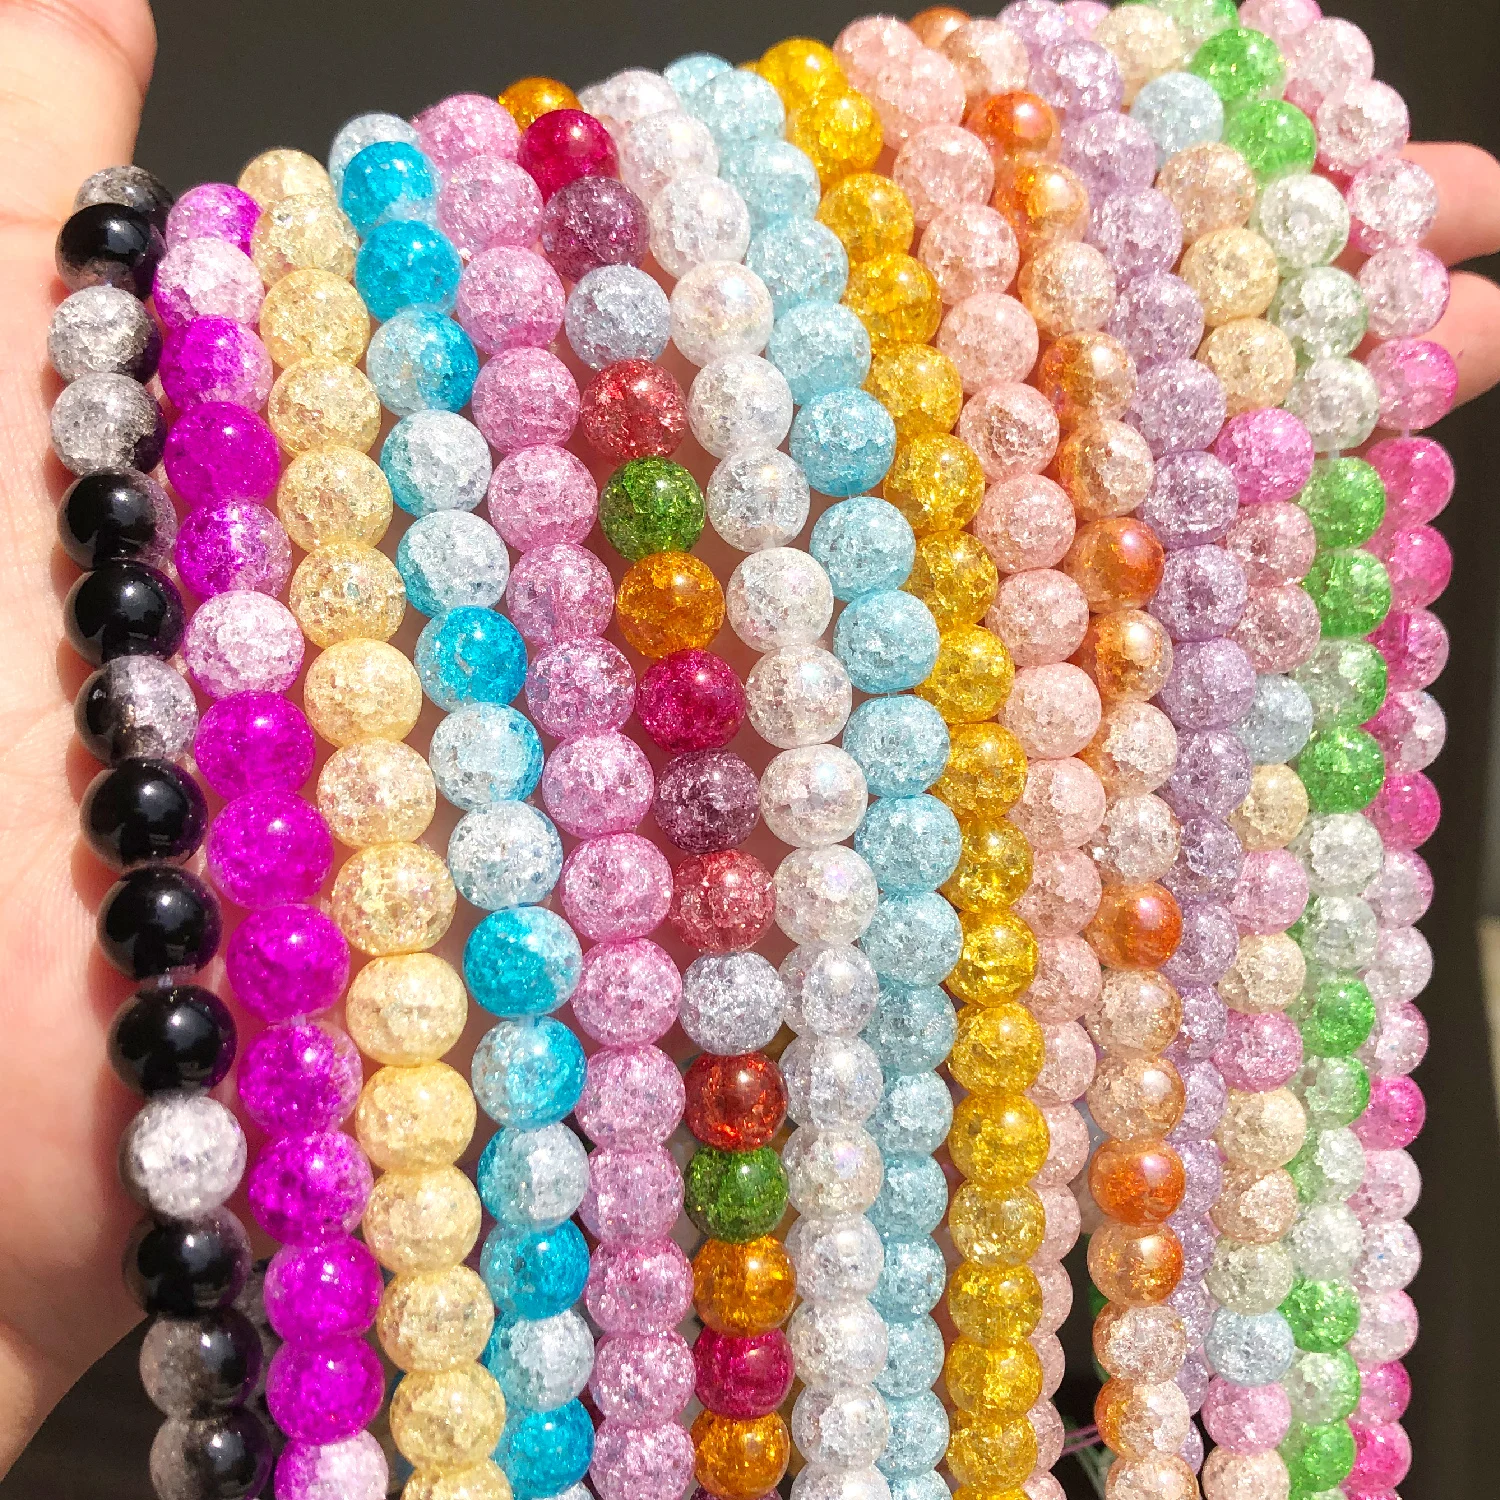 

White Snow Cracked Crystal Beads 4 6 8 10 12mm Multicolor Round Loose Spacer Beads for Jewelry Making DIY Bracelet Necklace 15''